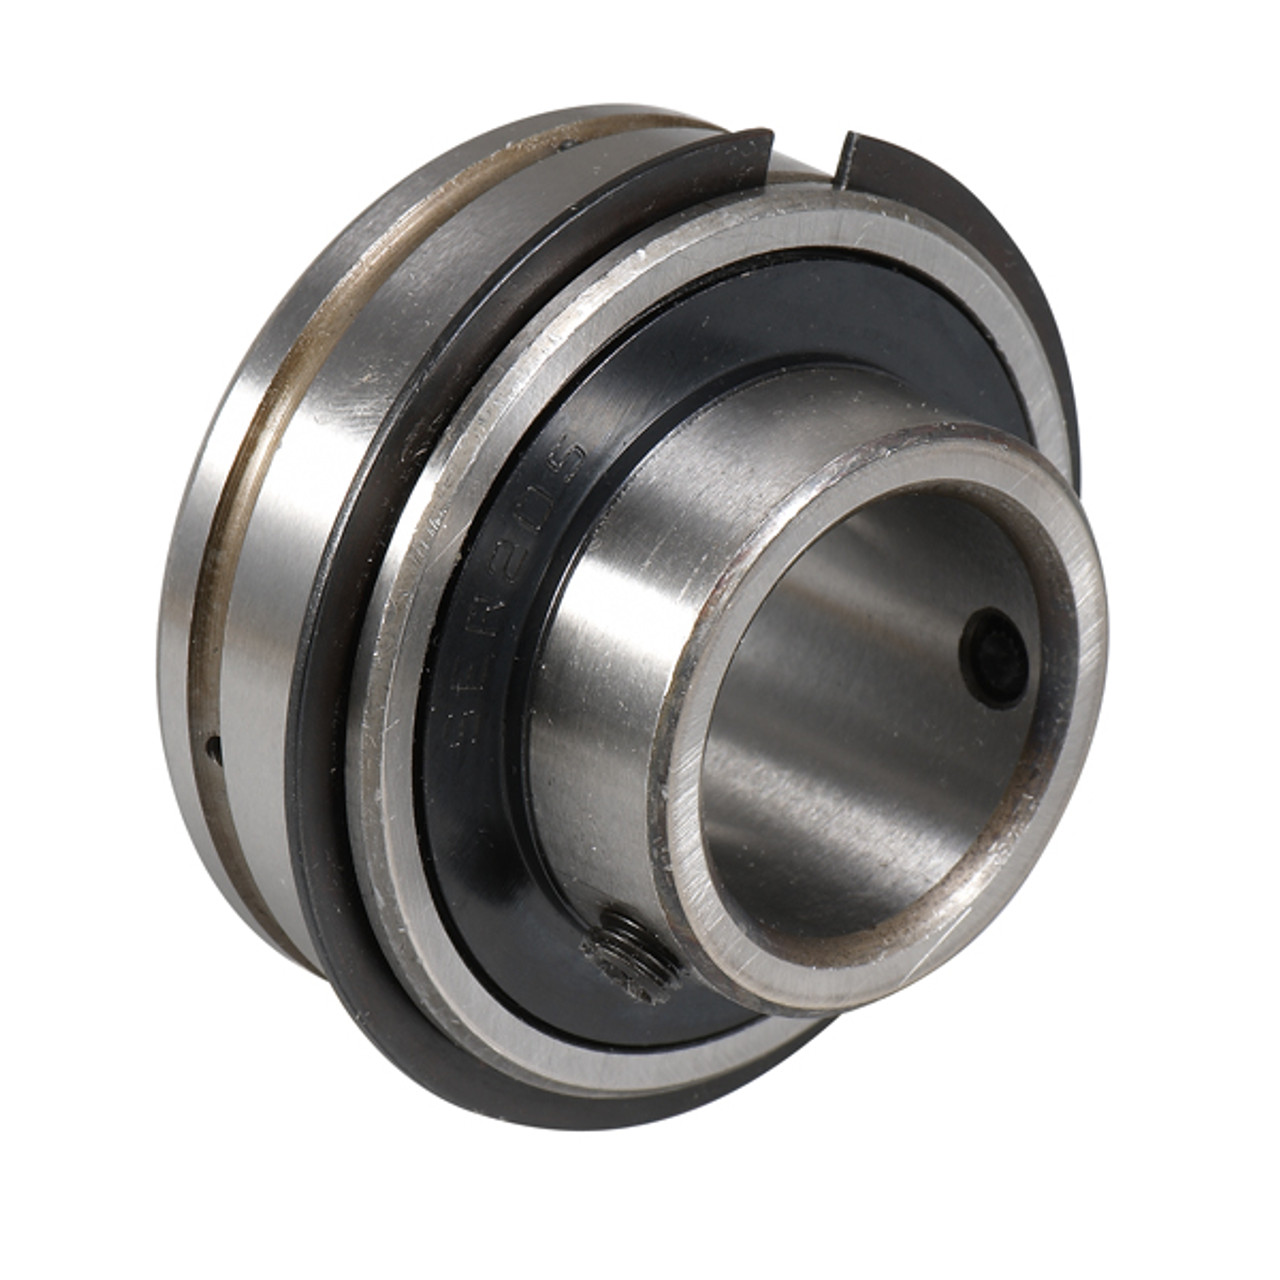 SER206-20 GENERIC 31.75mm Normal duty bearing insert with a parallel outer race and grubscrew locking - Imperial Thumbnail